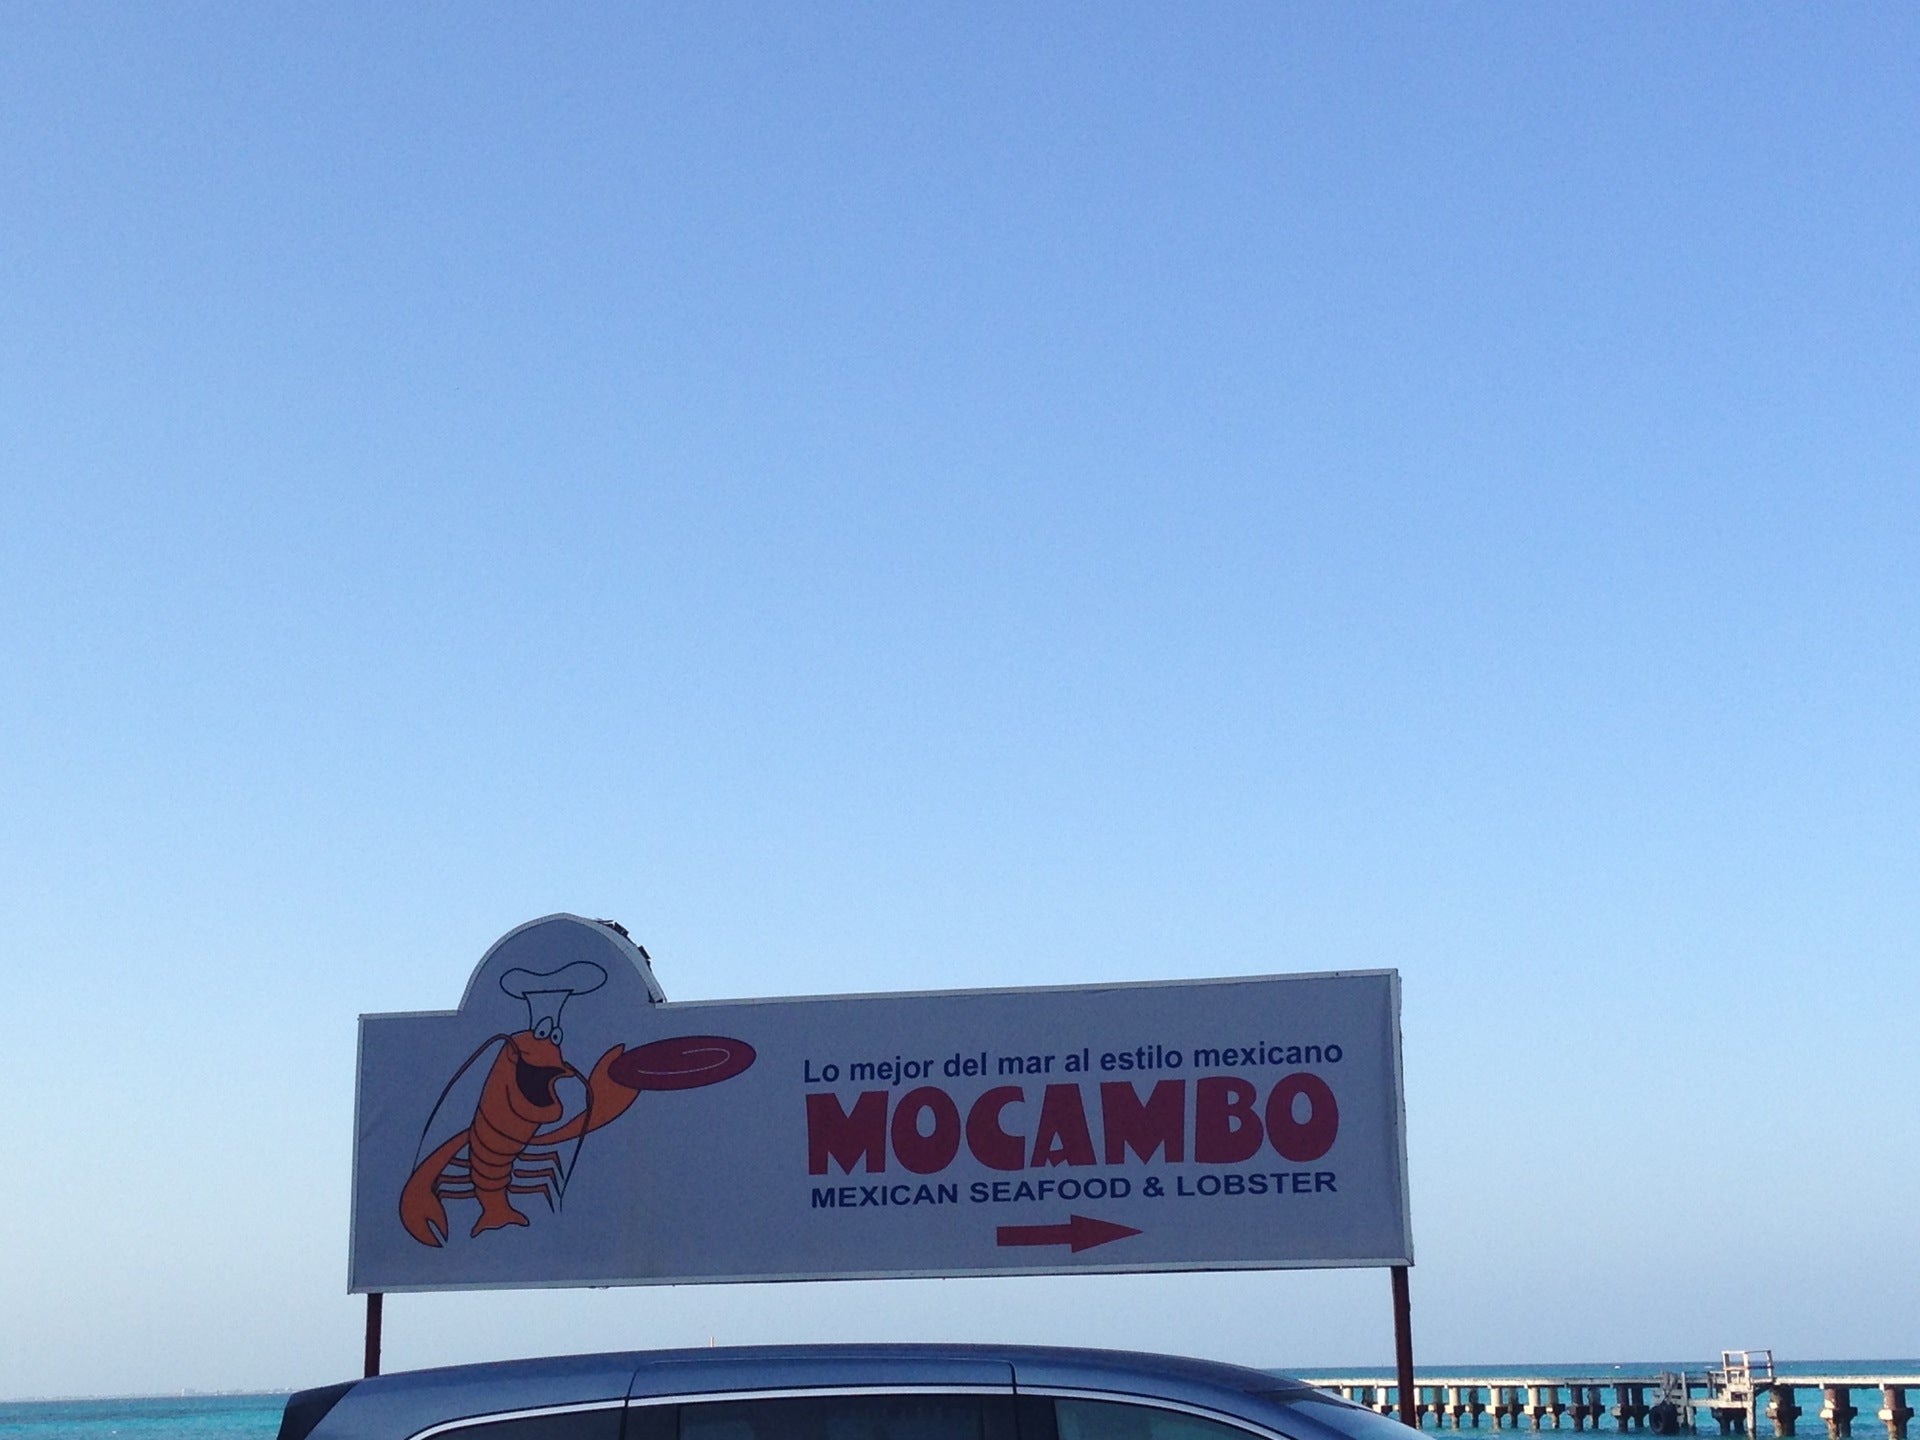 Mocambo Mexican Seafood & Lobster